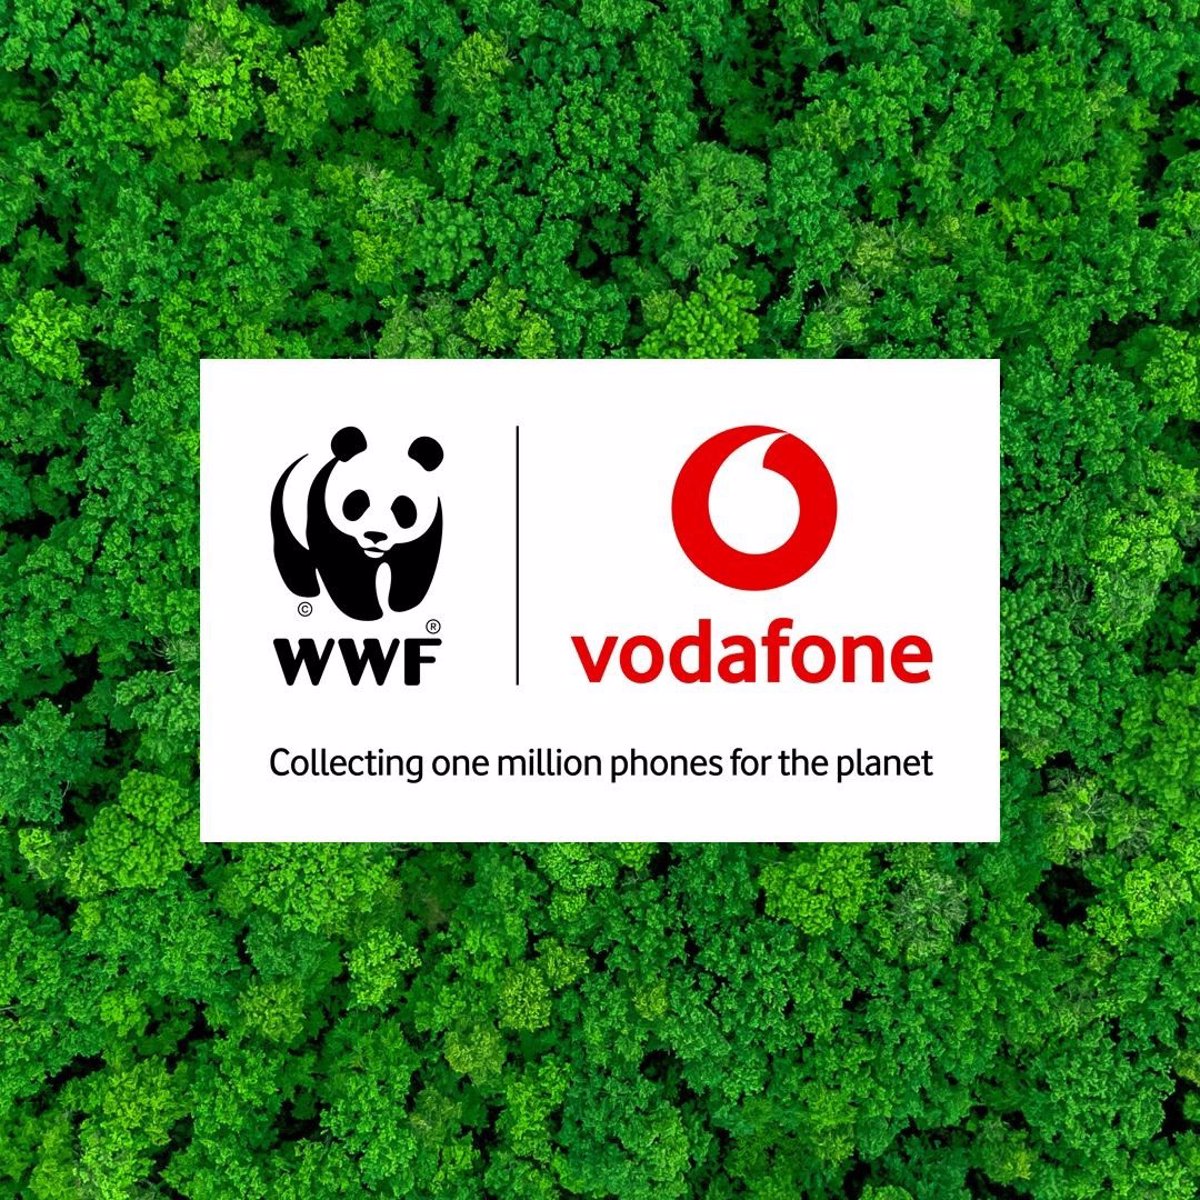 More than 200,000 mobile phones were reused and recycled worldwide in the first year under the agreement between Vodafone and WWF